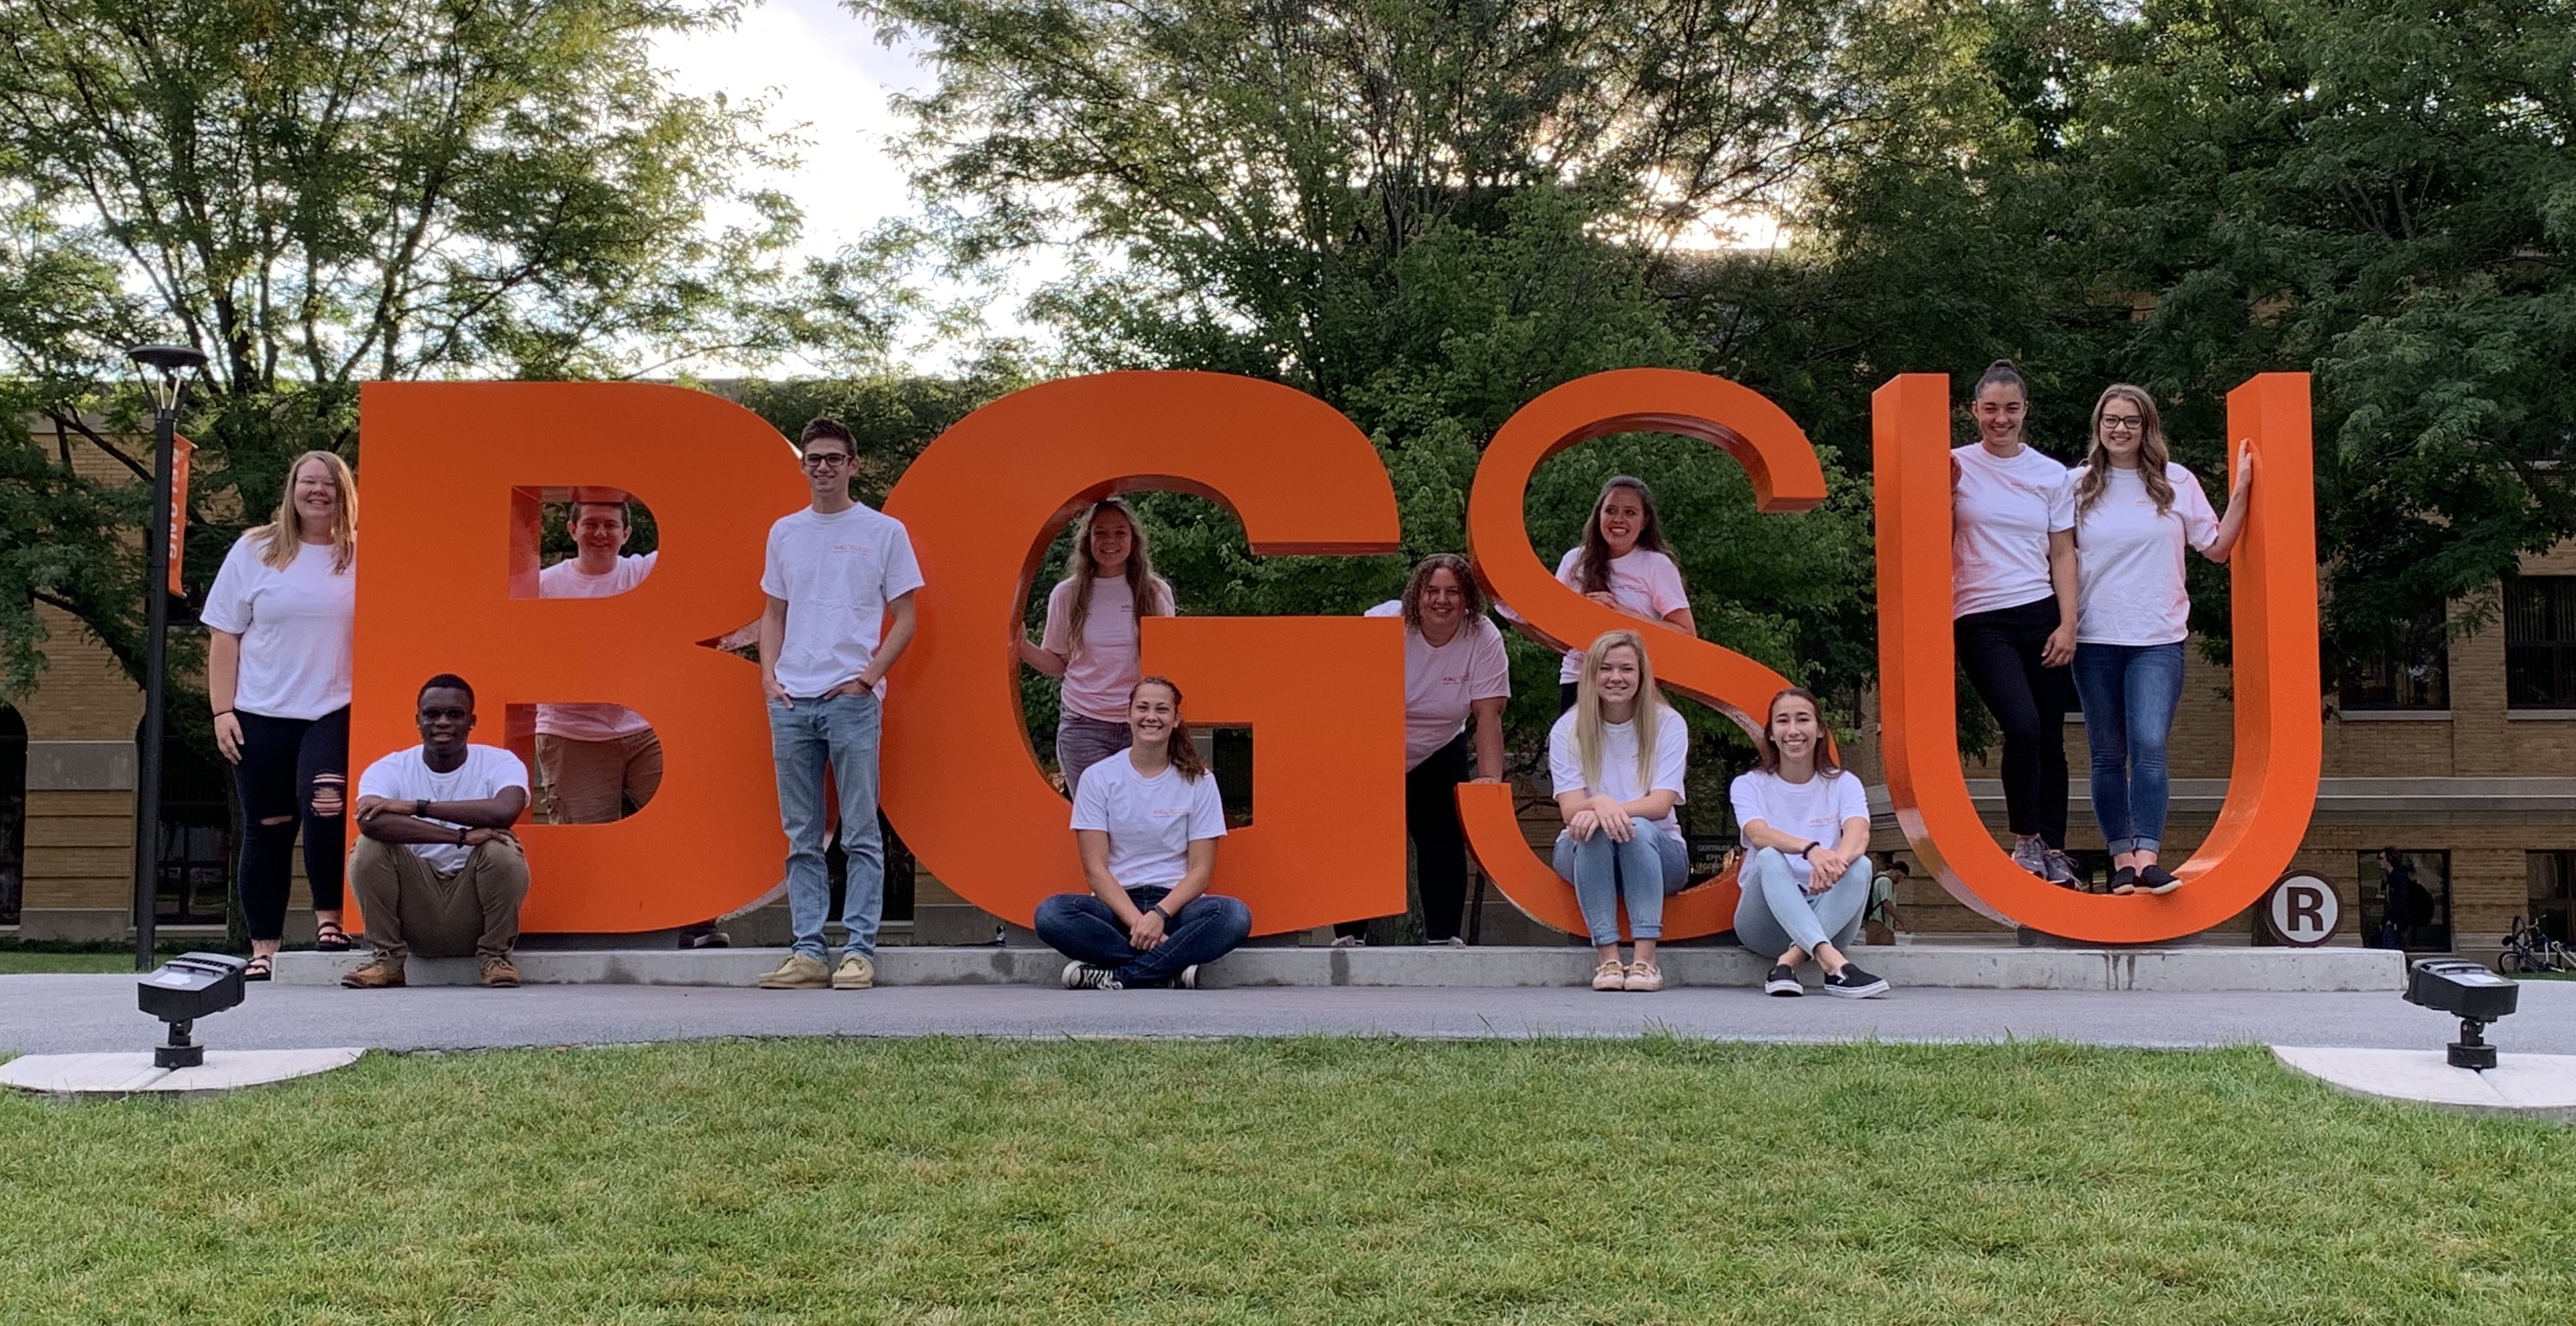 Fall 2019 Research Assistants for the Police Integrity Research Group posing at the BGSU letters.